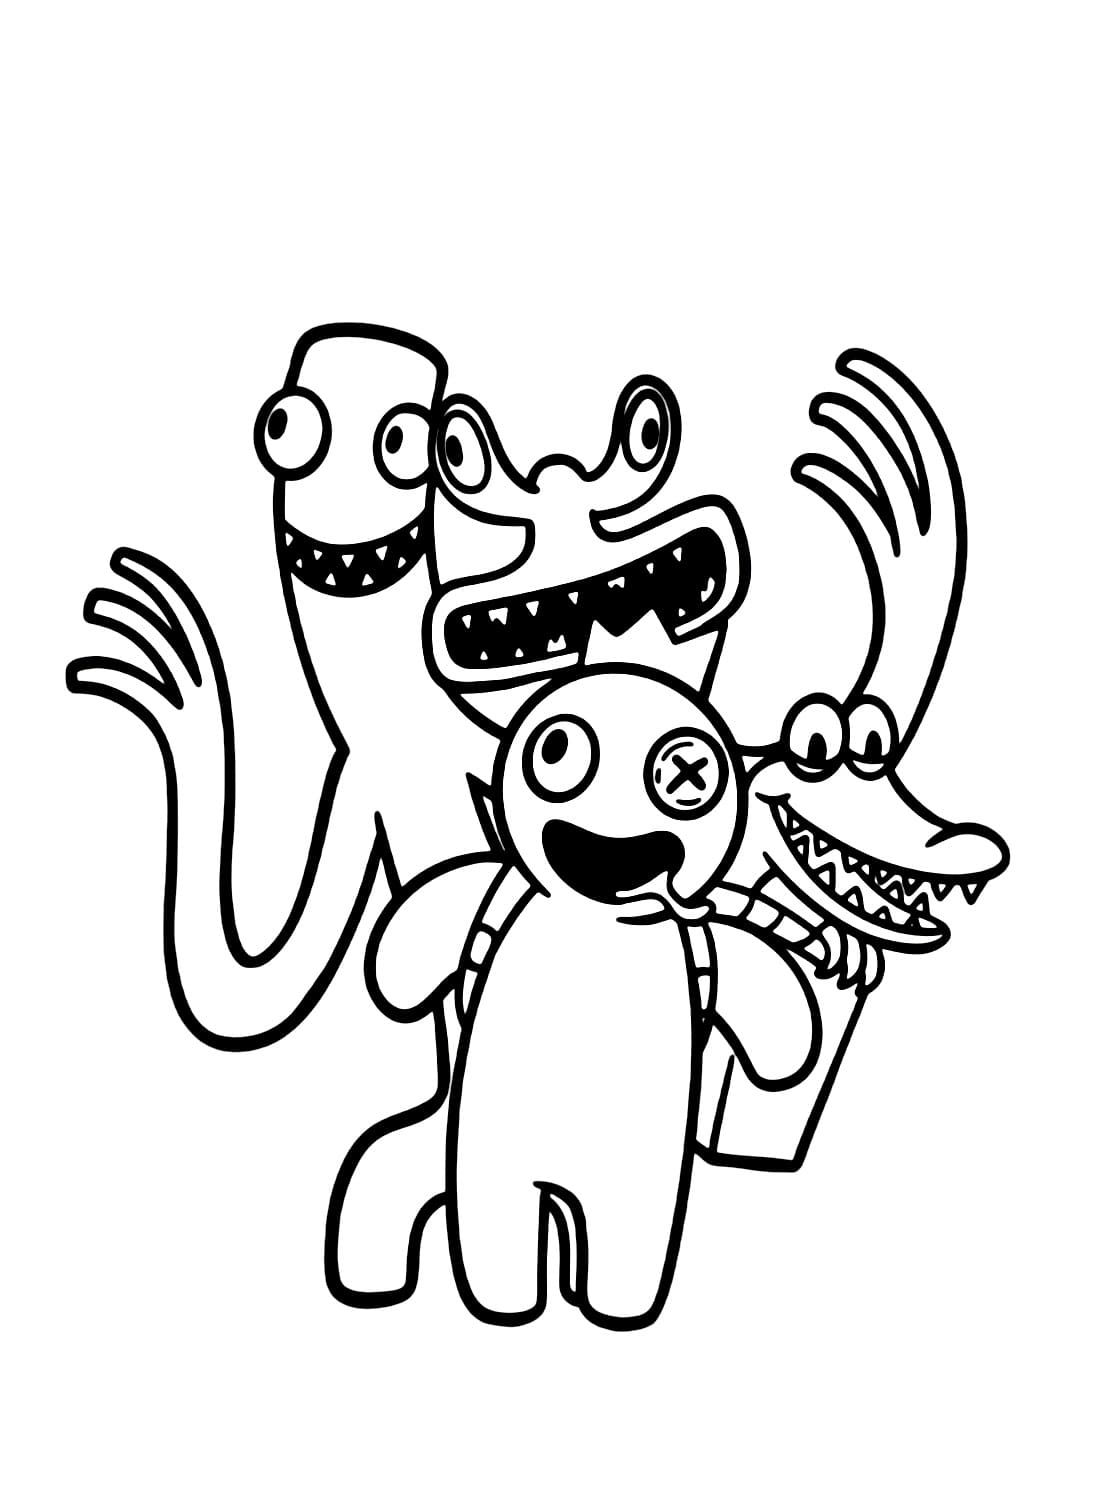 Rainbow friends characters coloring page